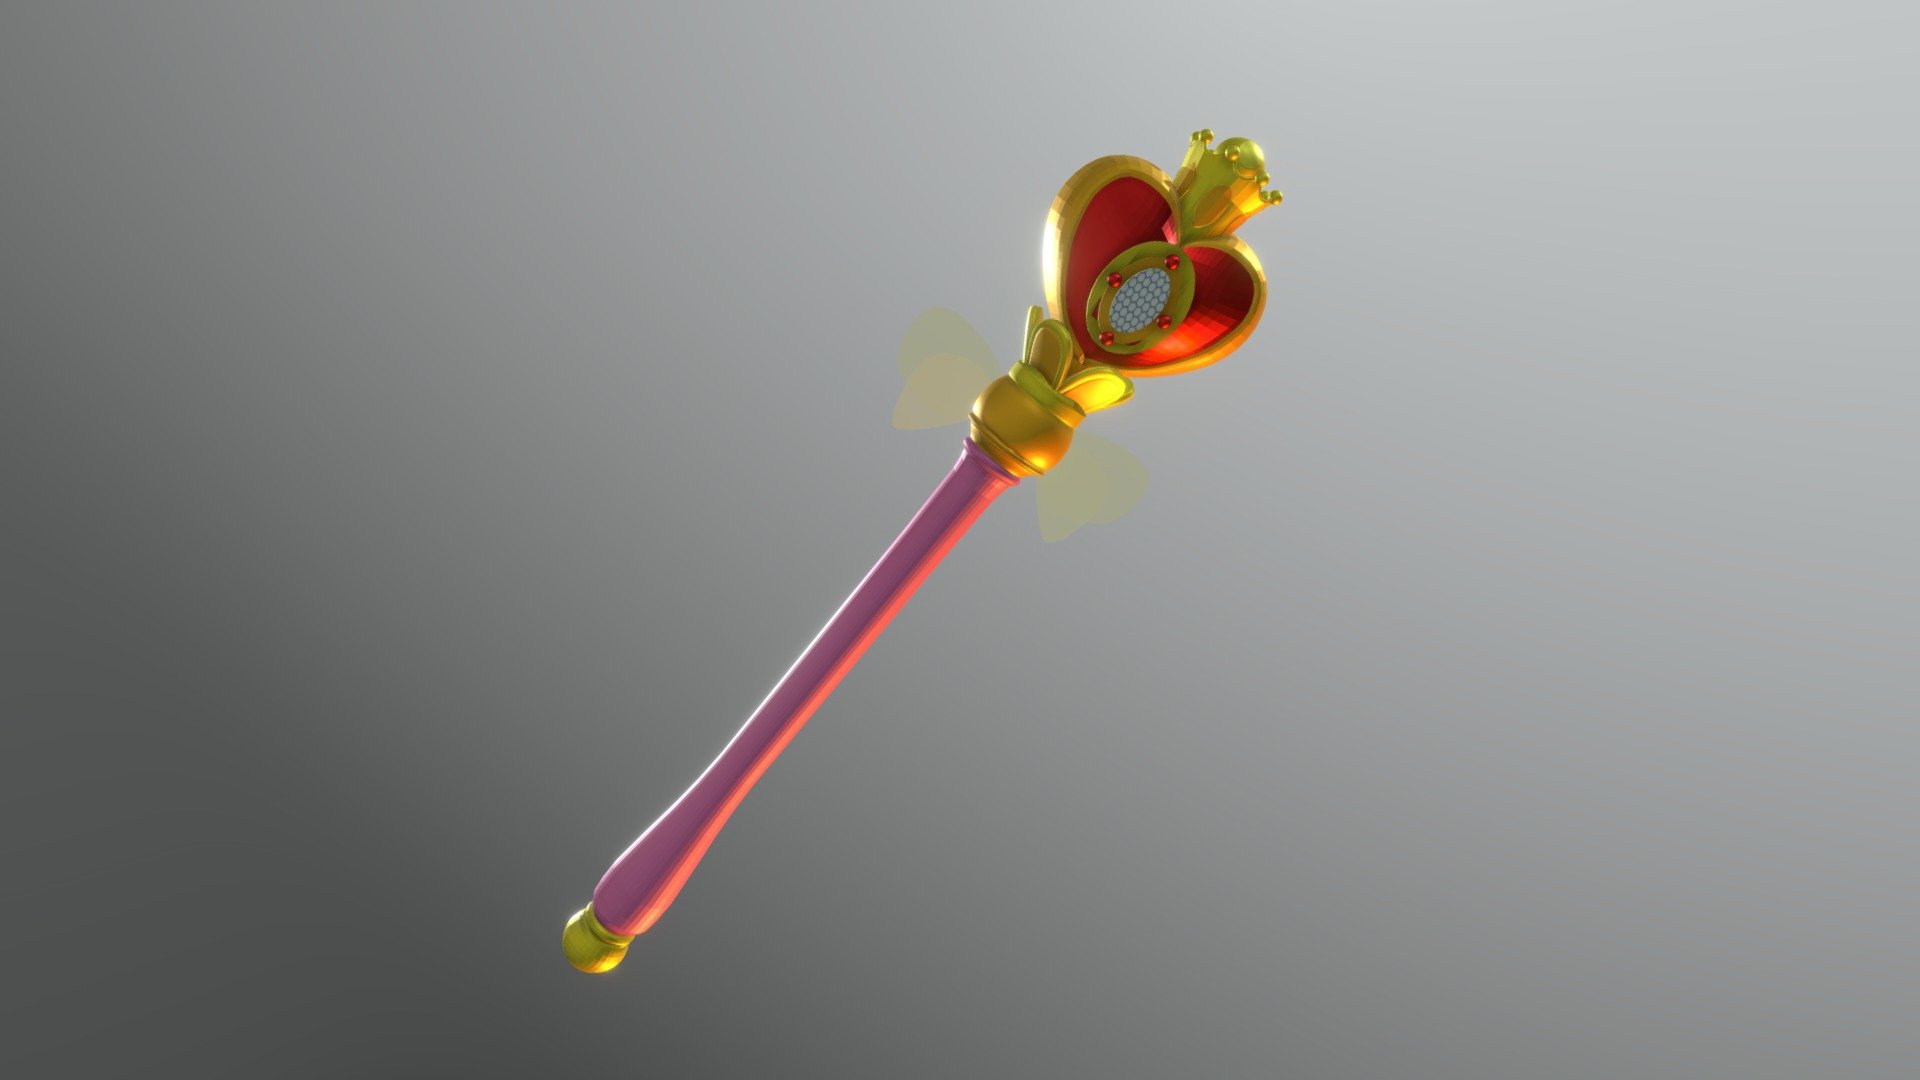 Sailor Moon was the first anime I ever watched and really shaped me as a kid. Even as an adult, I love the look of it. This wand is called Spiral heart Moon rod. The model owns a lot of the design marks from this artwork at deviantart:

 - Spiralheart Moon Rod - 3D model by AVahlstrom 3d model